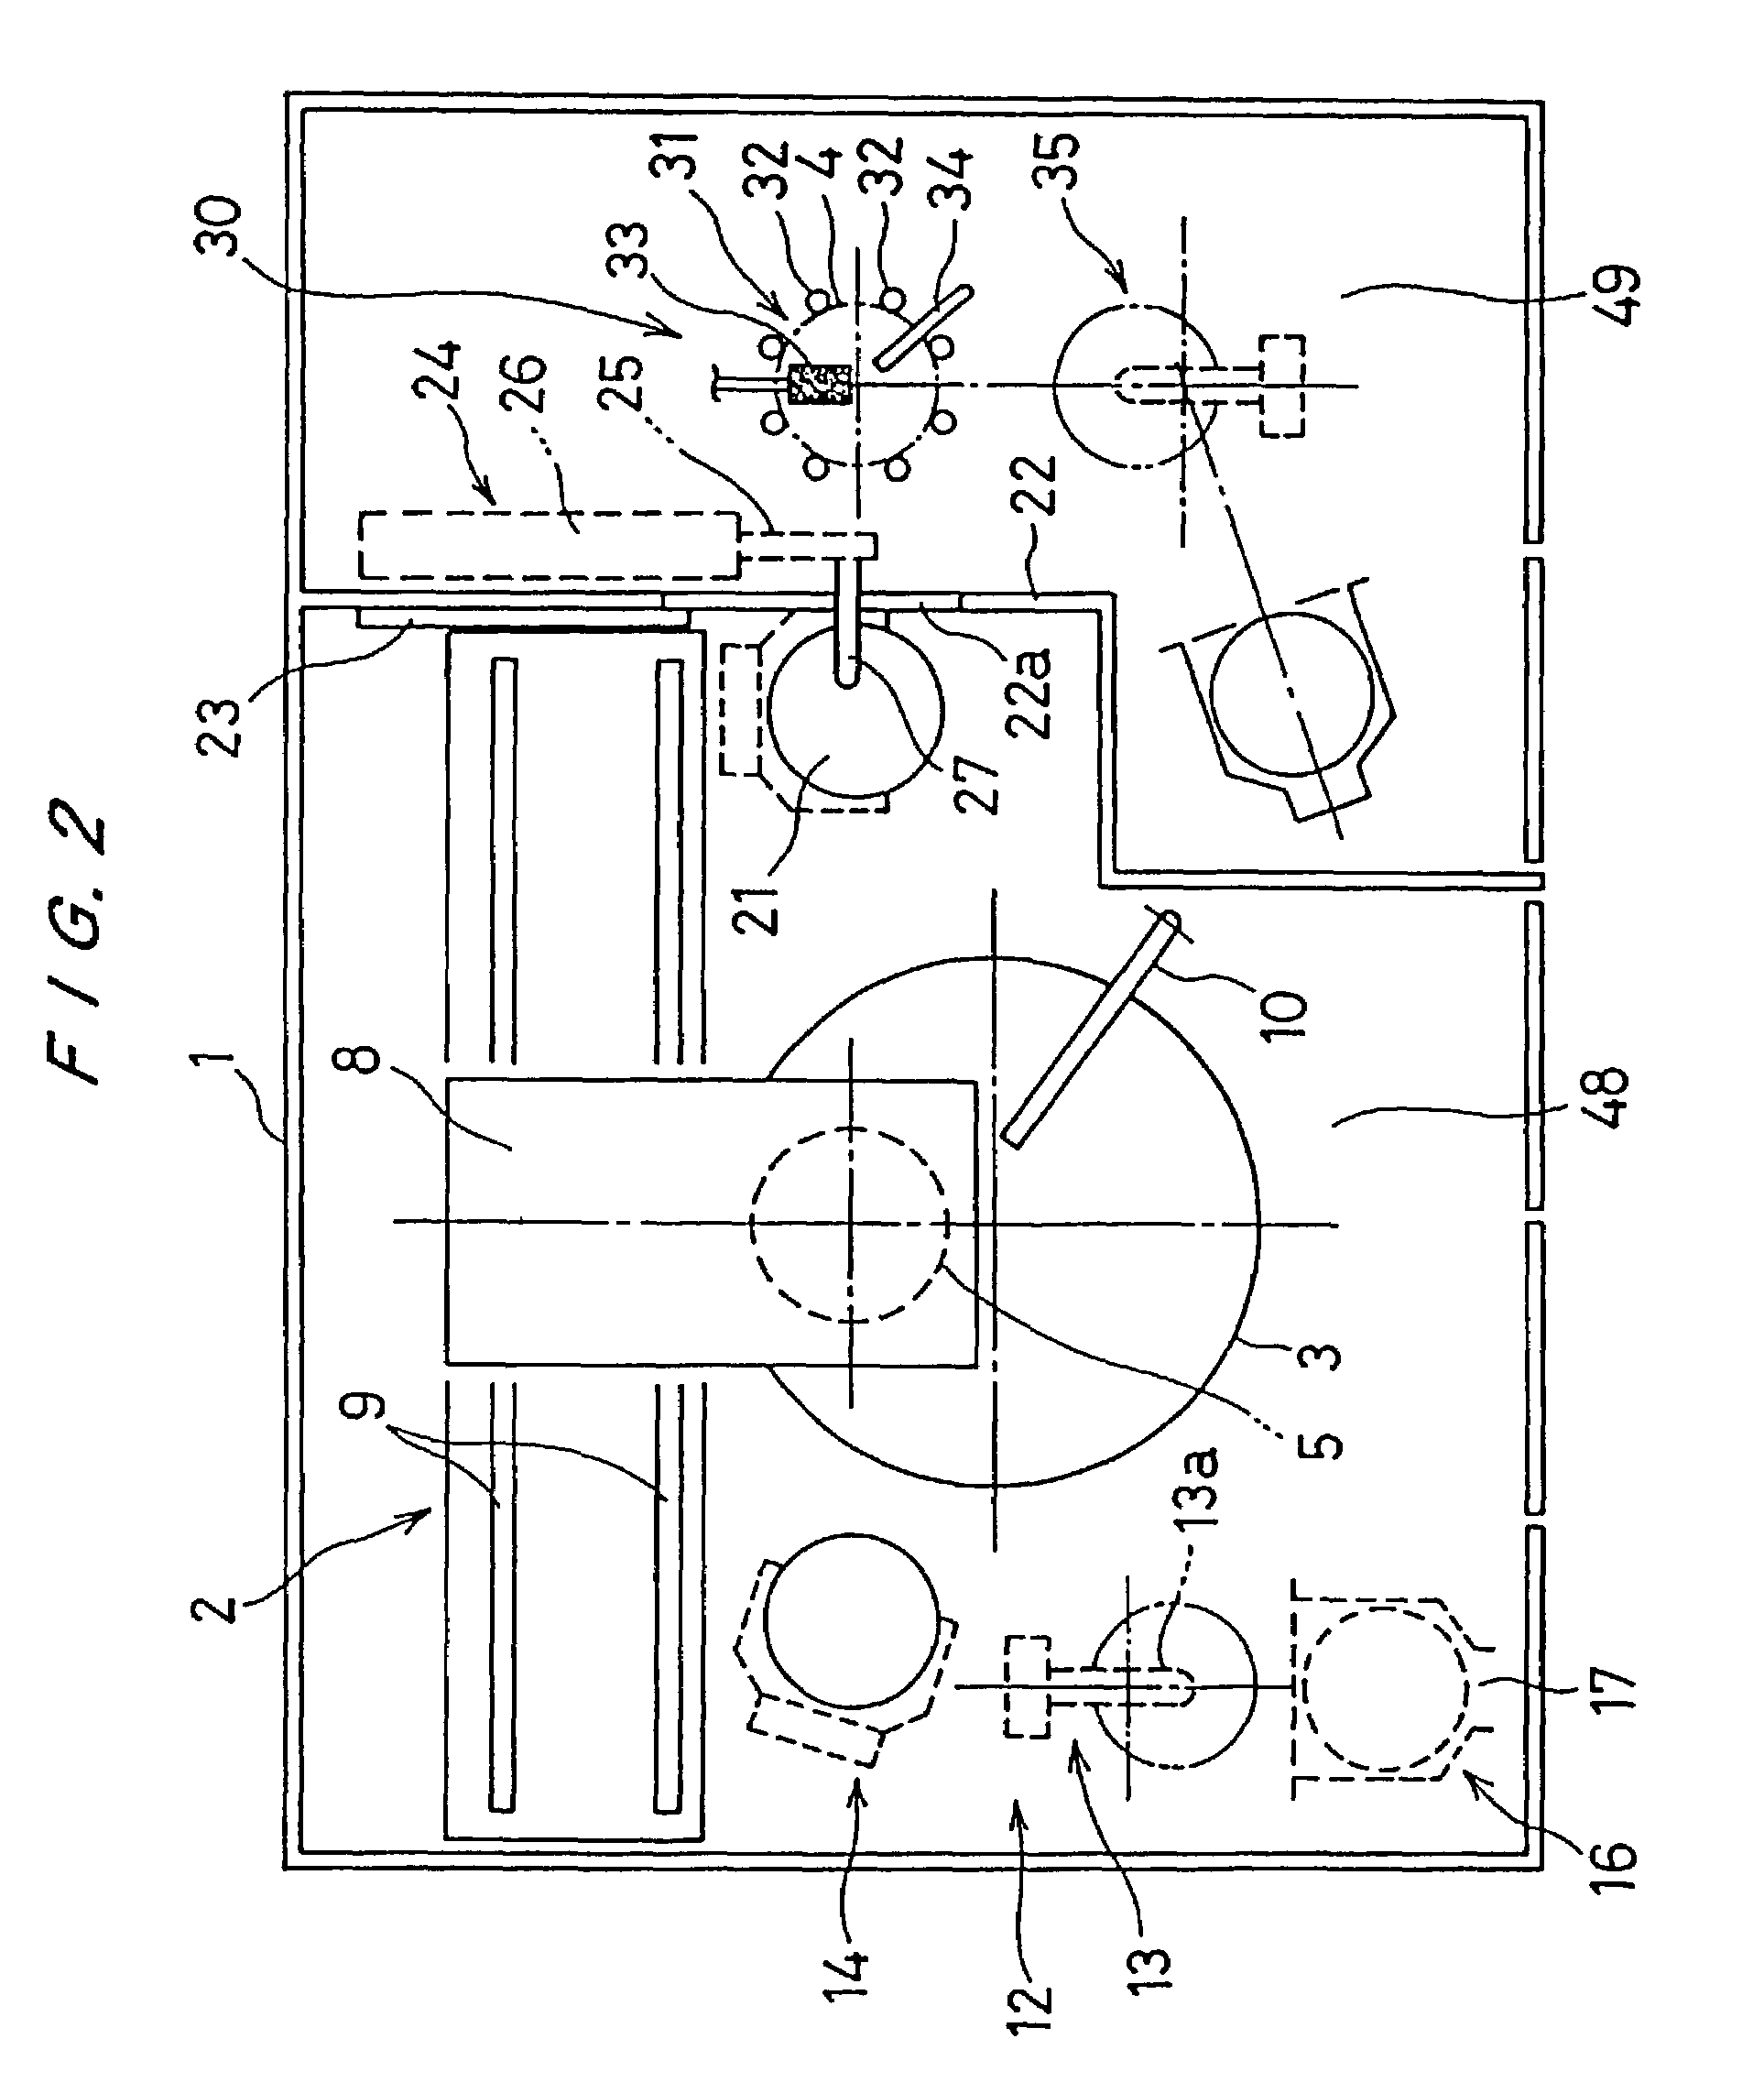 Polishing apparatus and a method of polishing and cleaning and drying a wafer